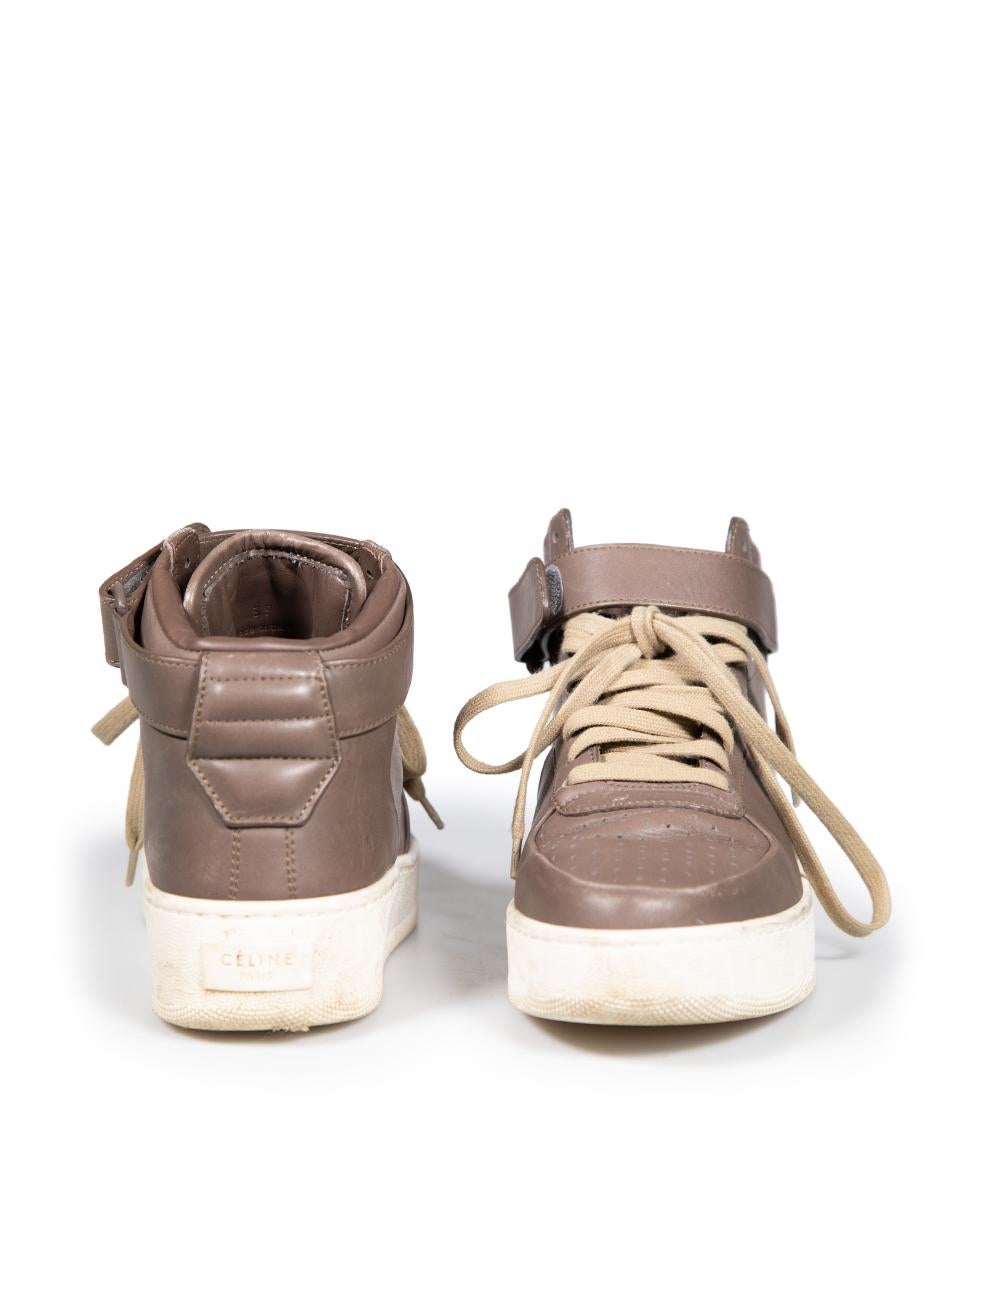 Céline Brown Leather Lace Up High Top Trainers Size IT 39 In Good Condition For Sale In London, GB